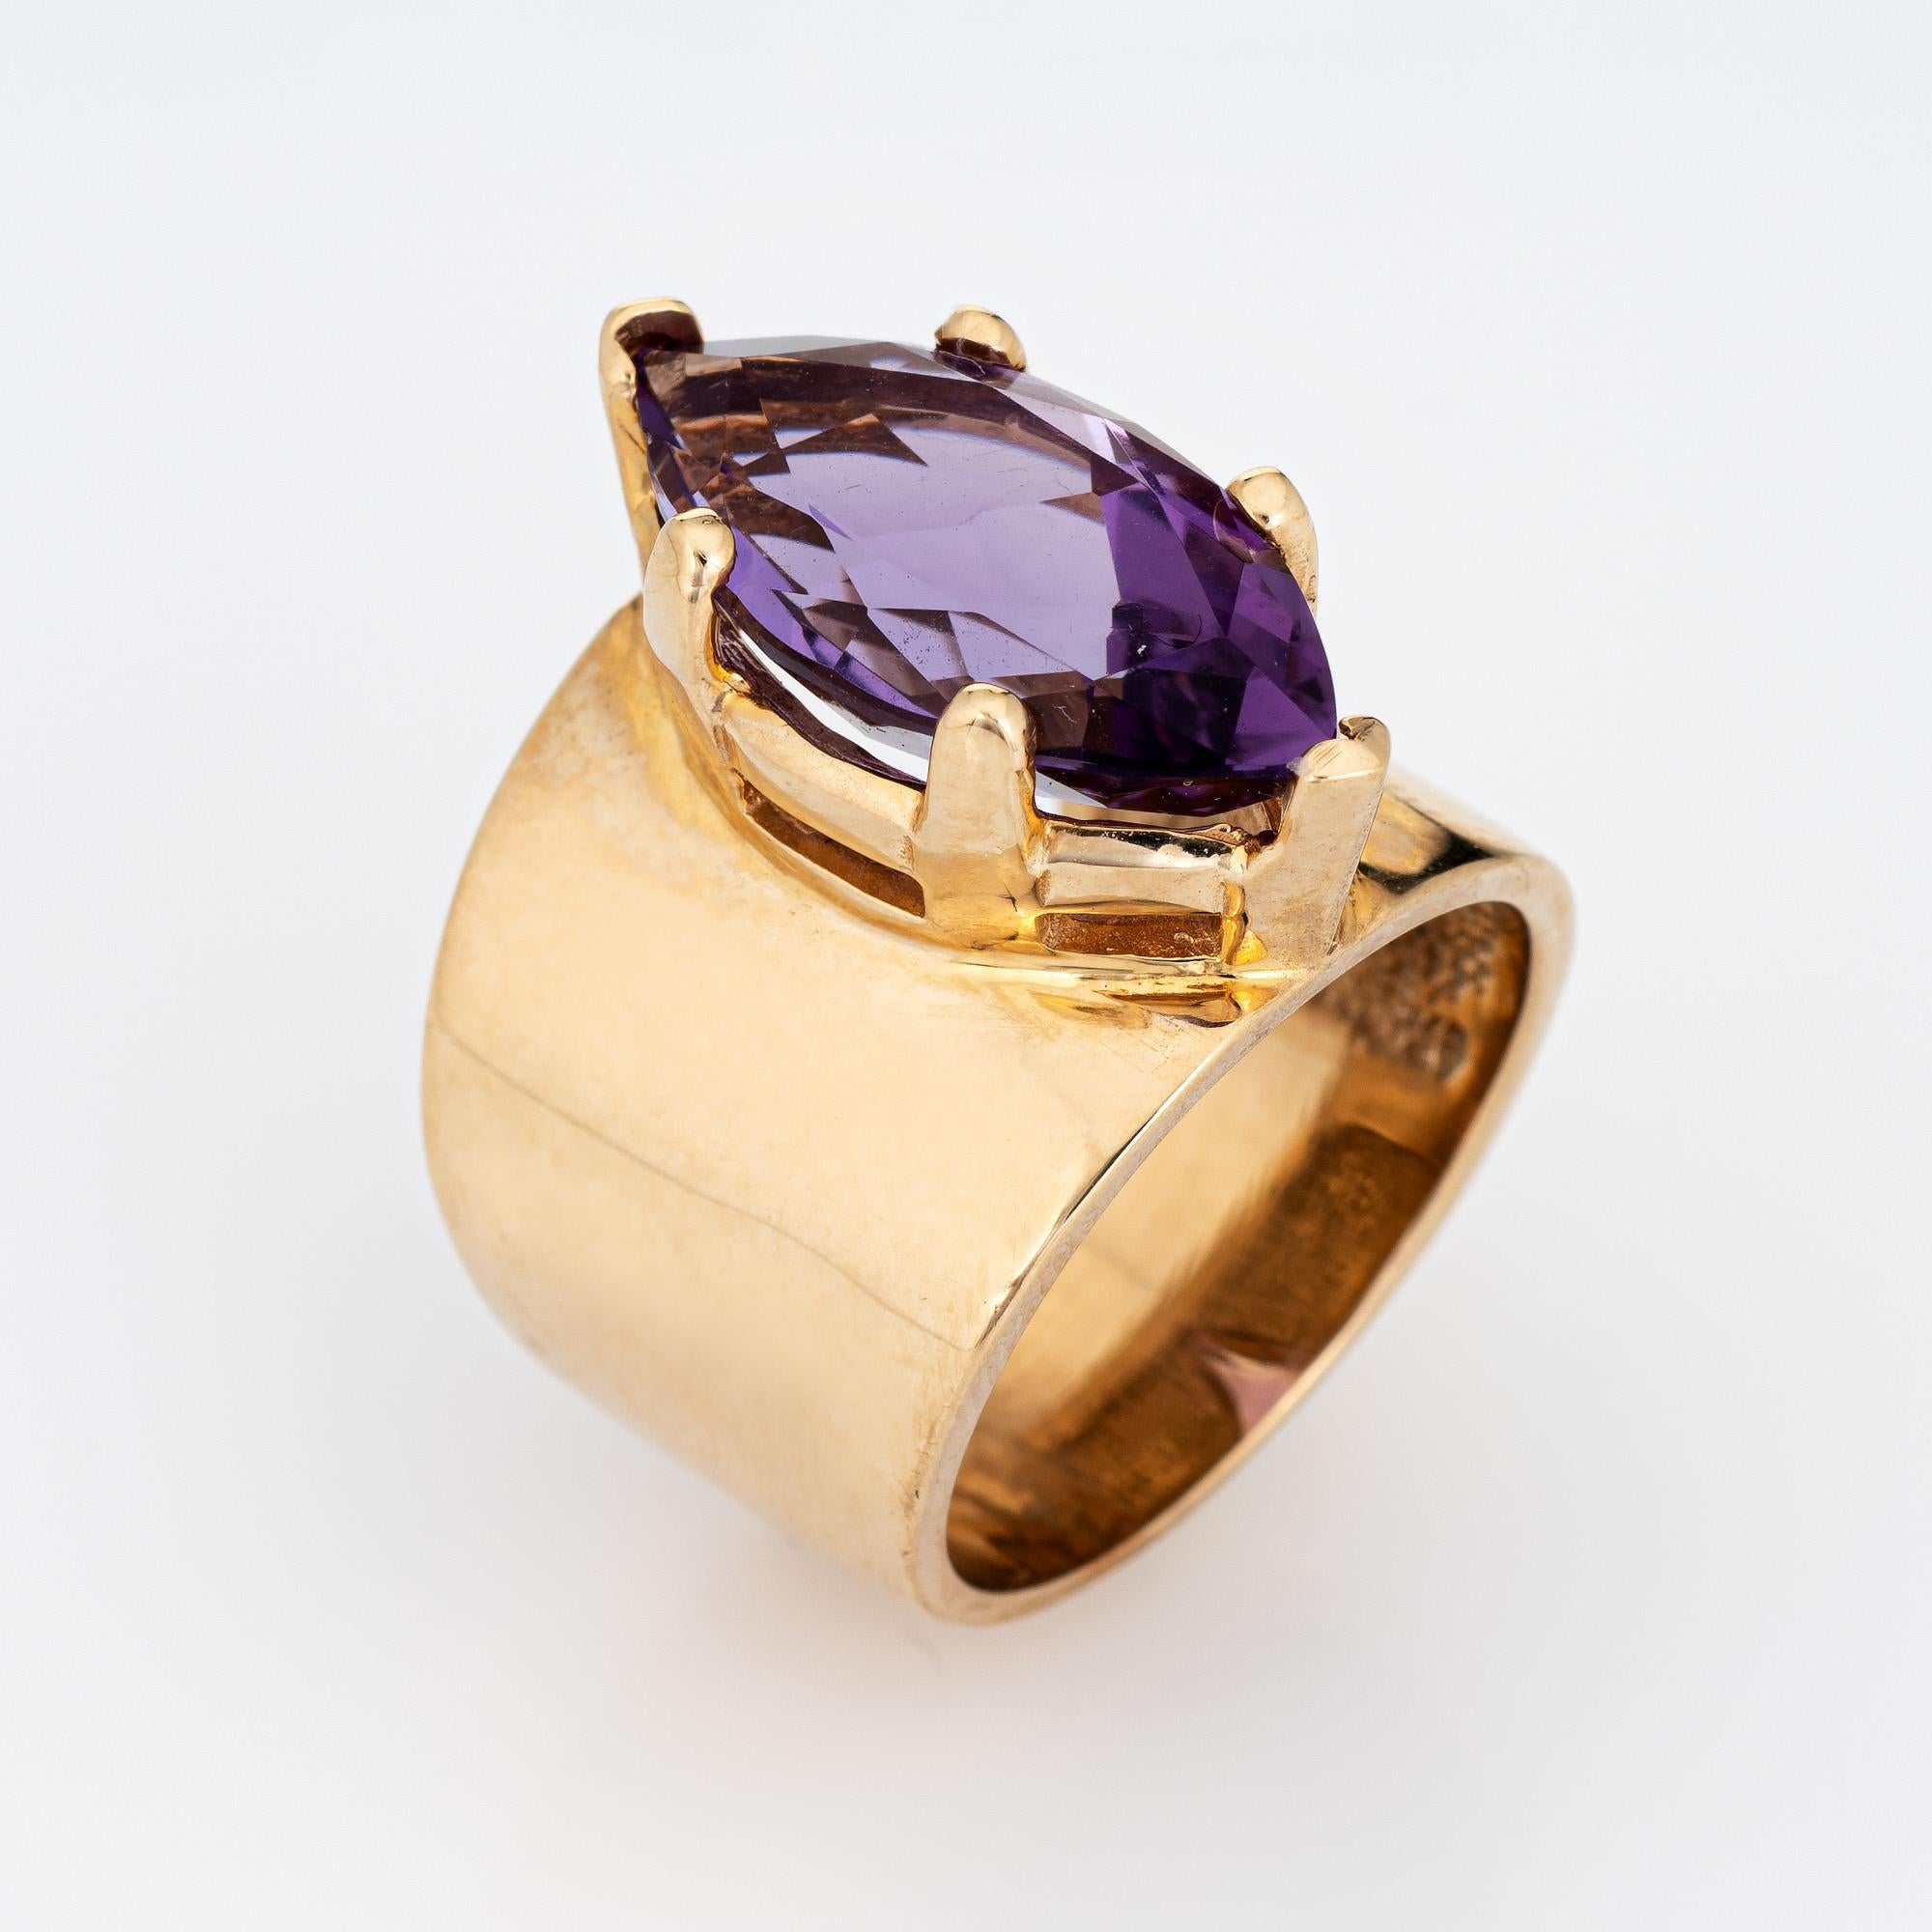 Stylish vintage marquise cut amethyst wide band ring (circa 1970s) crafted in 10 karat yellow gold. 

Marquise cut amethyst measures 20mm x 9mm (estimated at 6 carats). The amethyst is in very good condition and free of cracks or chips. 

The royal